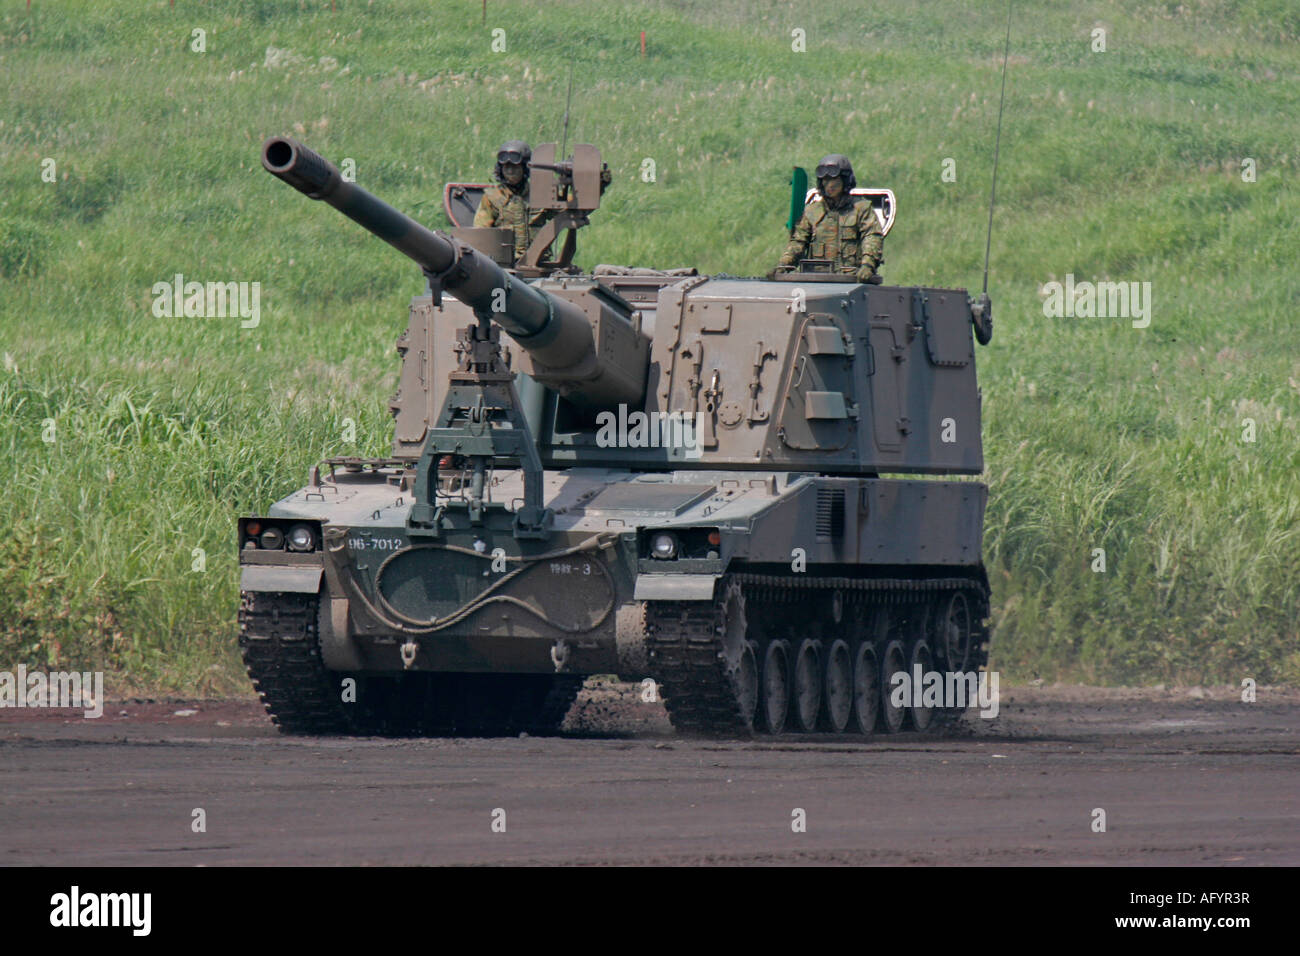 Type 99 155mm Self Propelled Gun of Japan Ground Self Defence Force Stock Photo